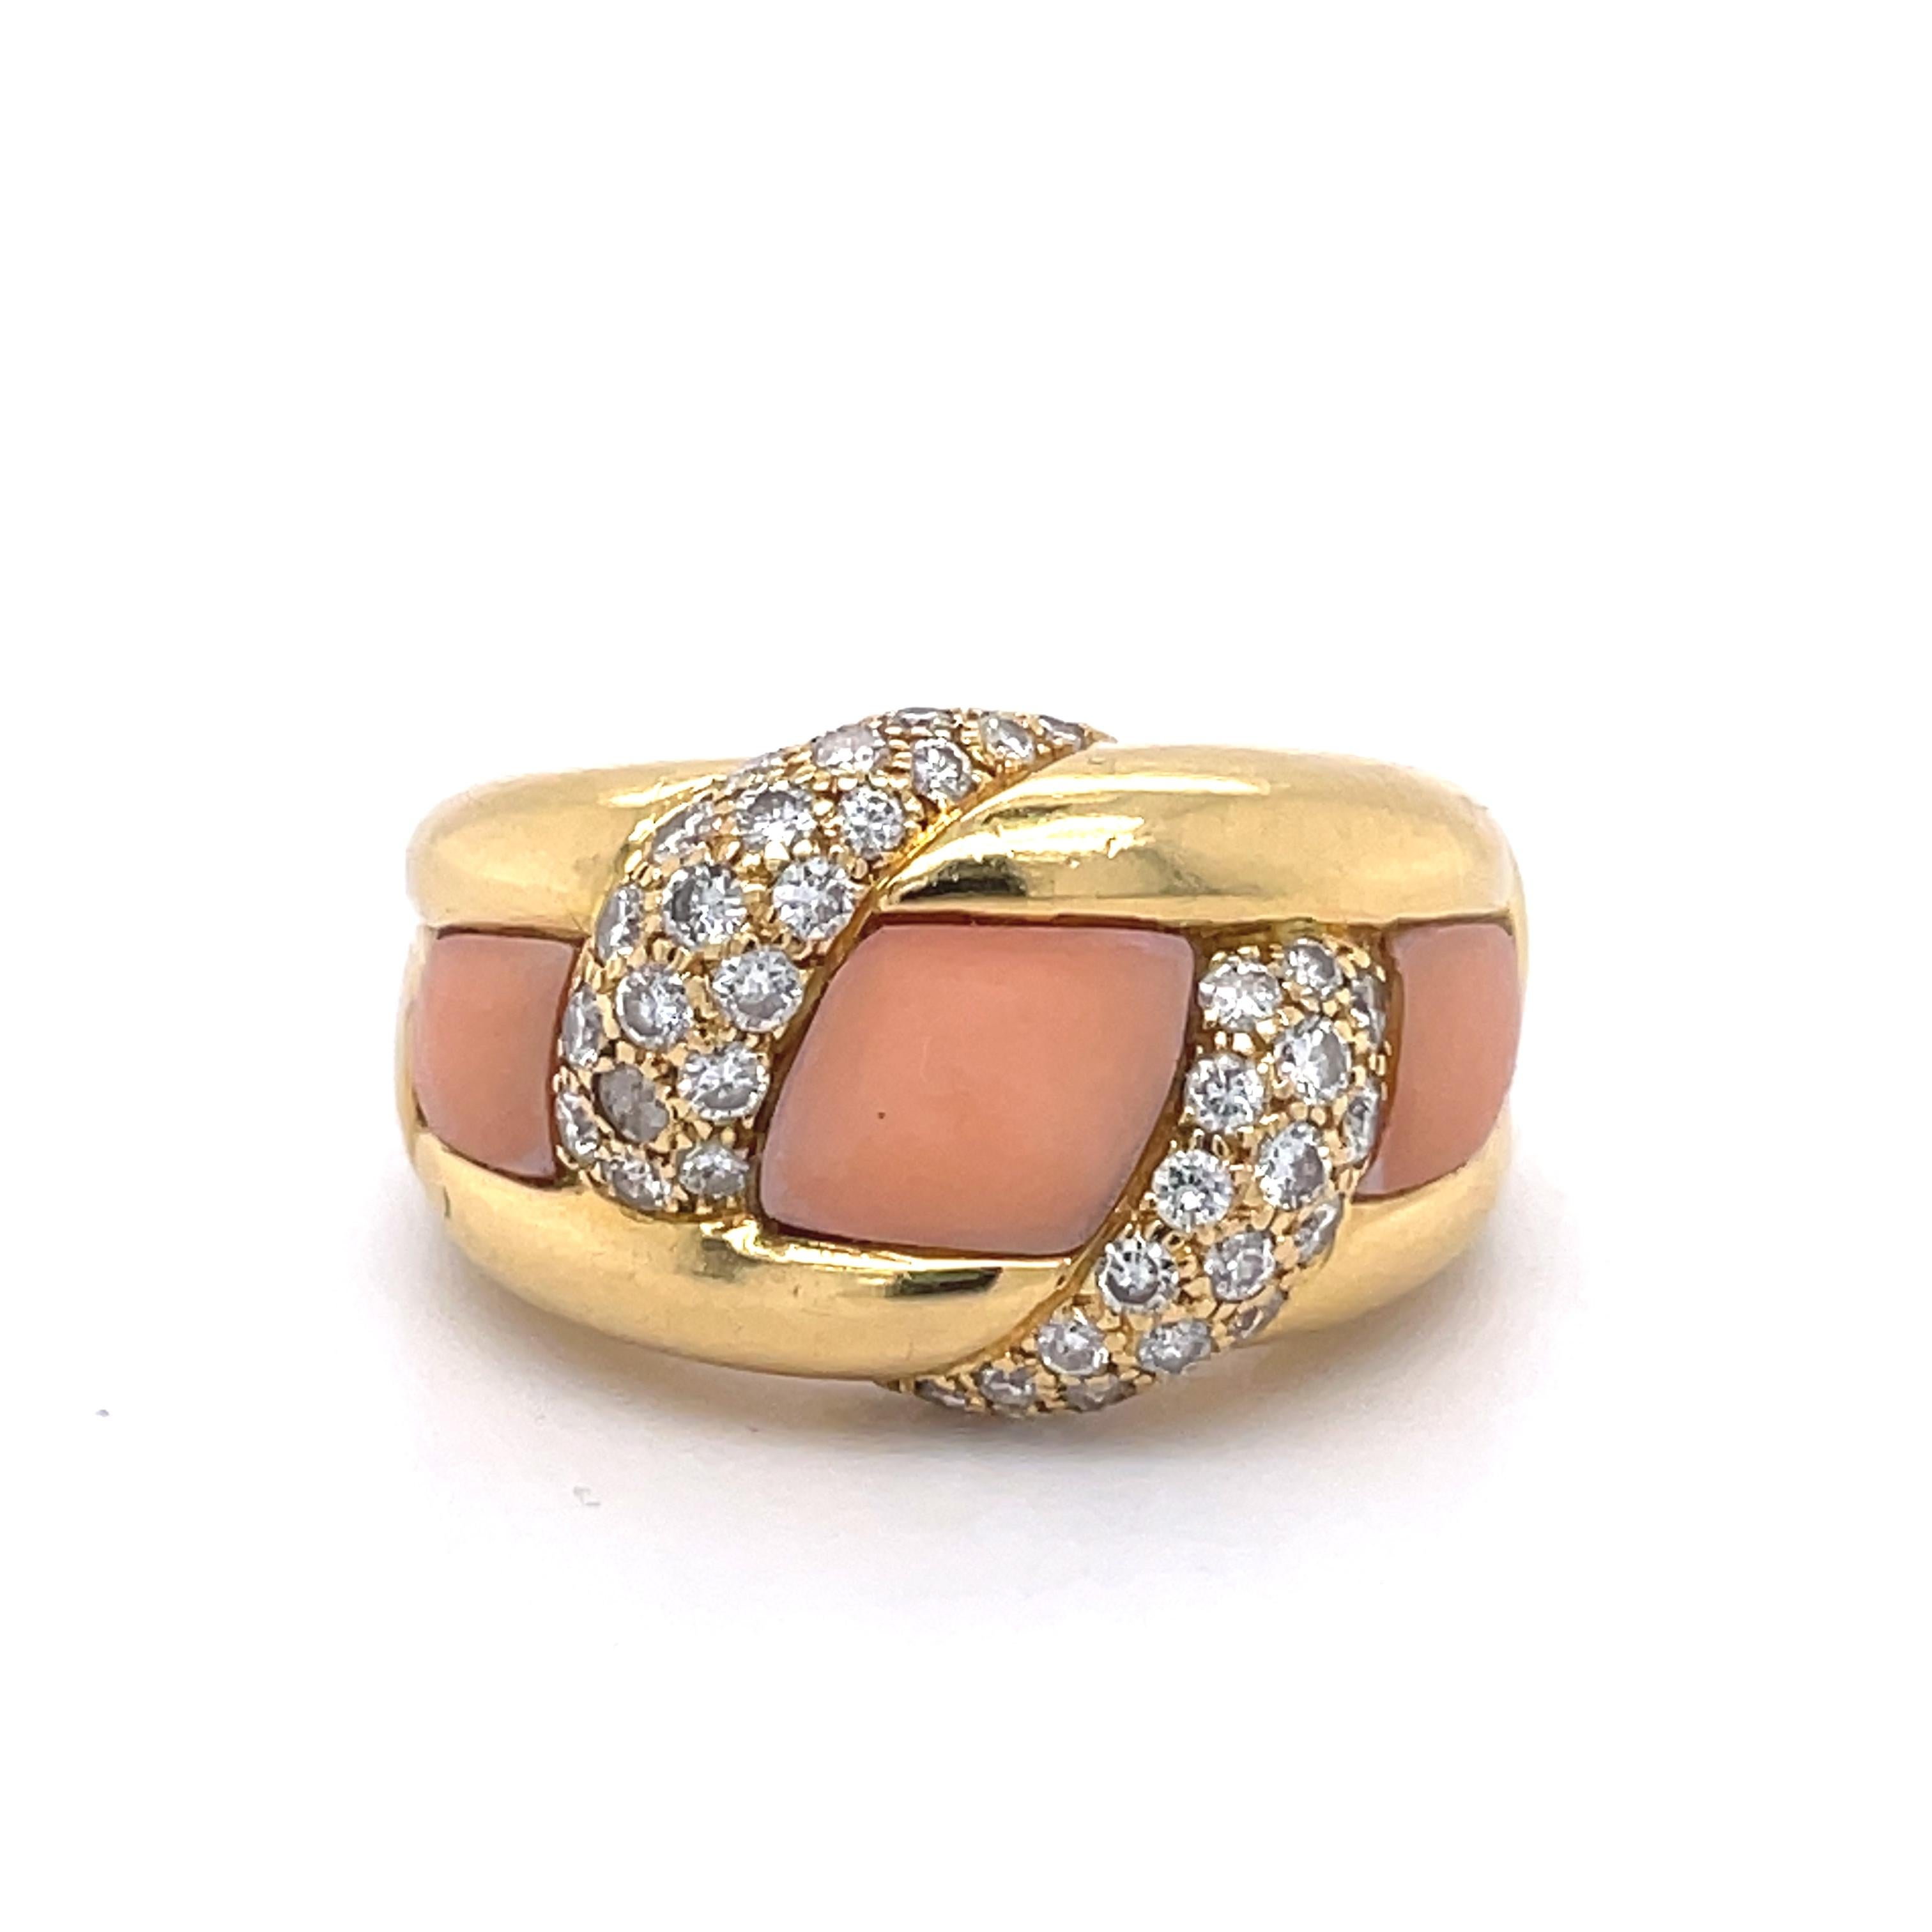 Vintage Coral Ring - 18K yellow gold, 0.5CT Diamonds, Cocktail ring, Estate ring
~~ S e t t i n g ~~
Solid 18k Yellow Gold
12.97 grams
Ring Size 6.5 US
 
~~ Stones ~~

Round Shape Natural Diamond In Weight Of 0.50 Ct (Approx.)
Clarity - Si1
Color  -